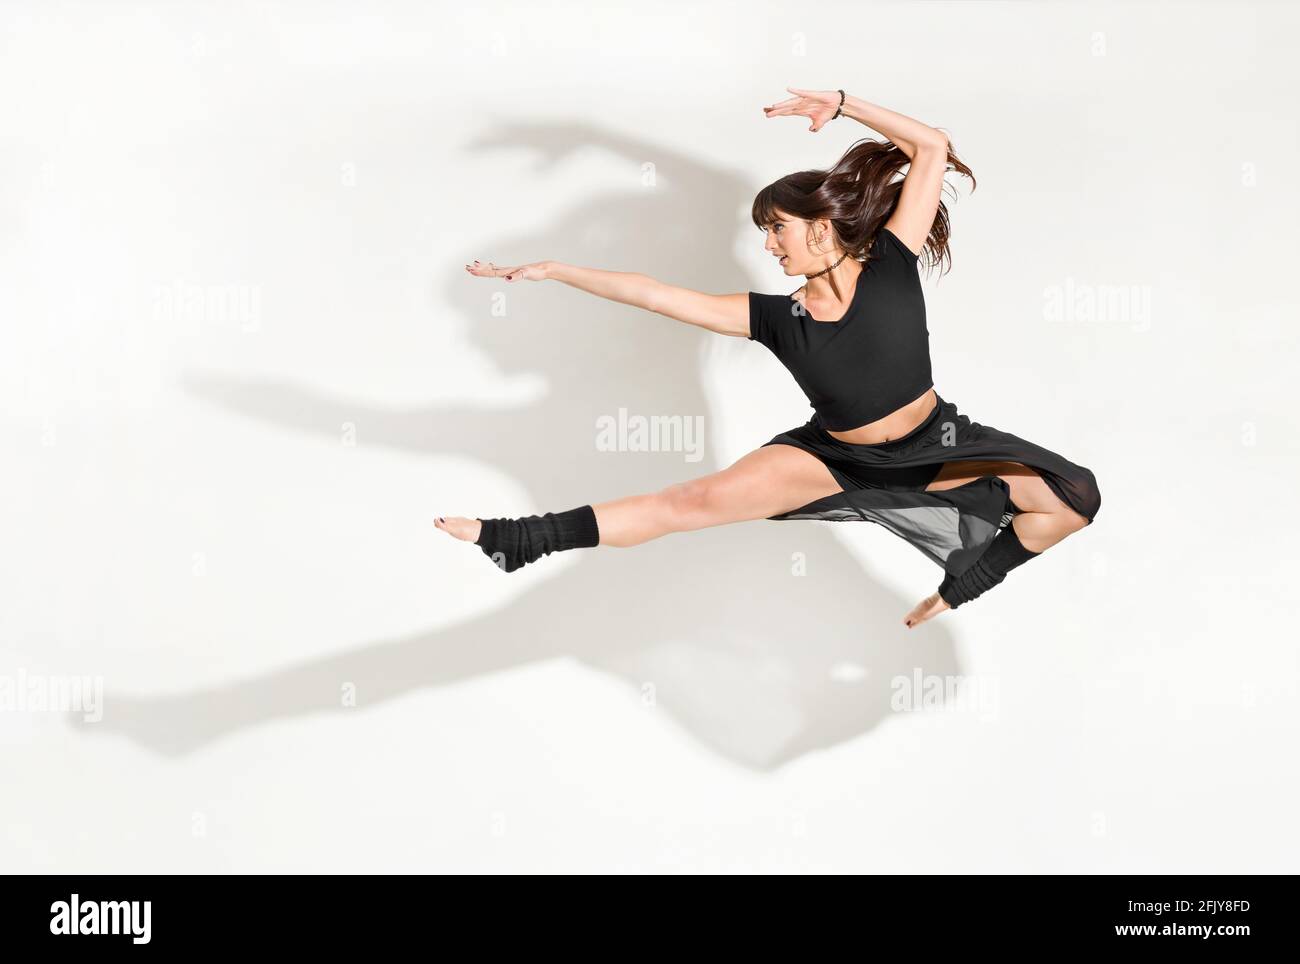 Agile young woman dancer performing a front half split jump with long hair flying in a midair pose isolated on white with dramatic shadow and copyspac Stock Photo